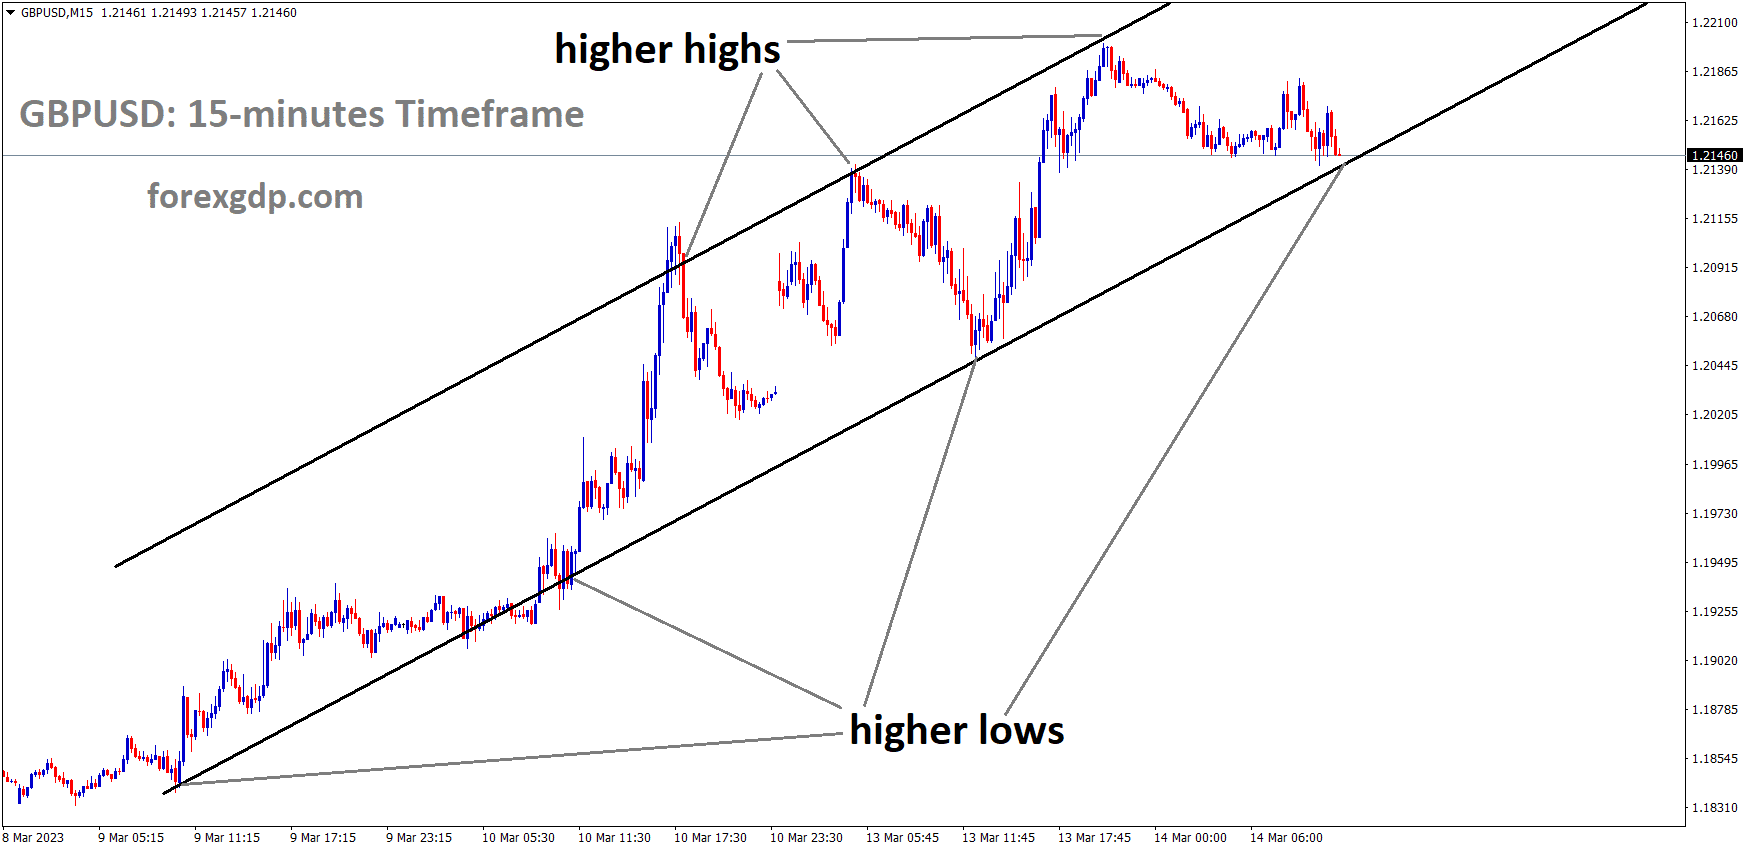 GBPUSD is moving in an Ascending channel and the market has reached the higher low area of the channel